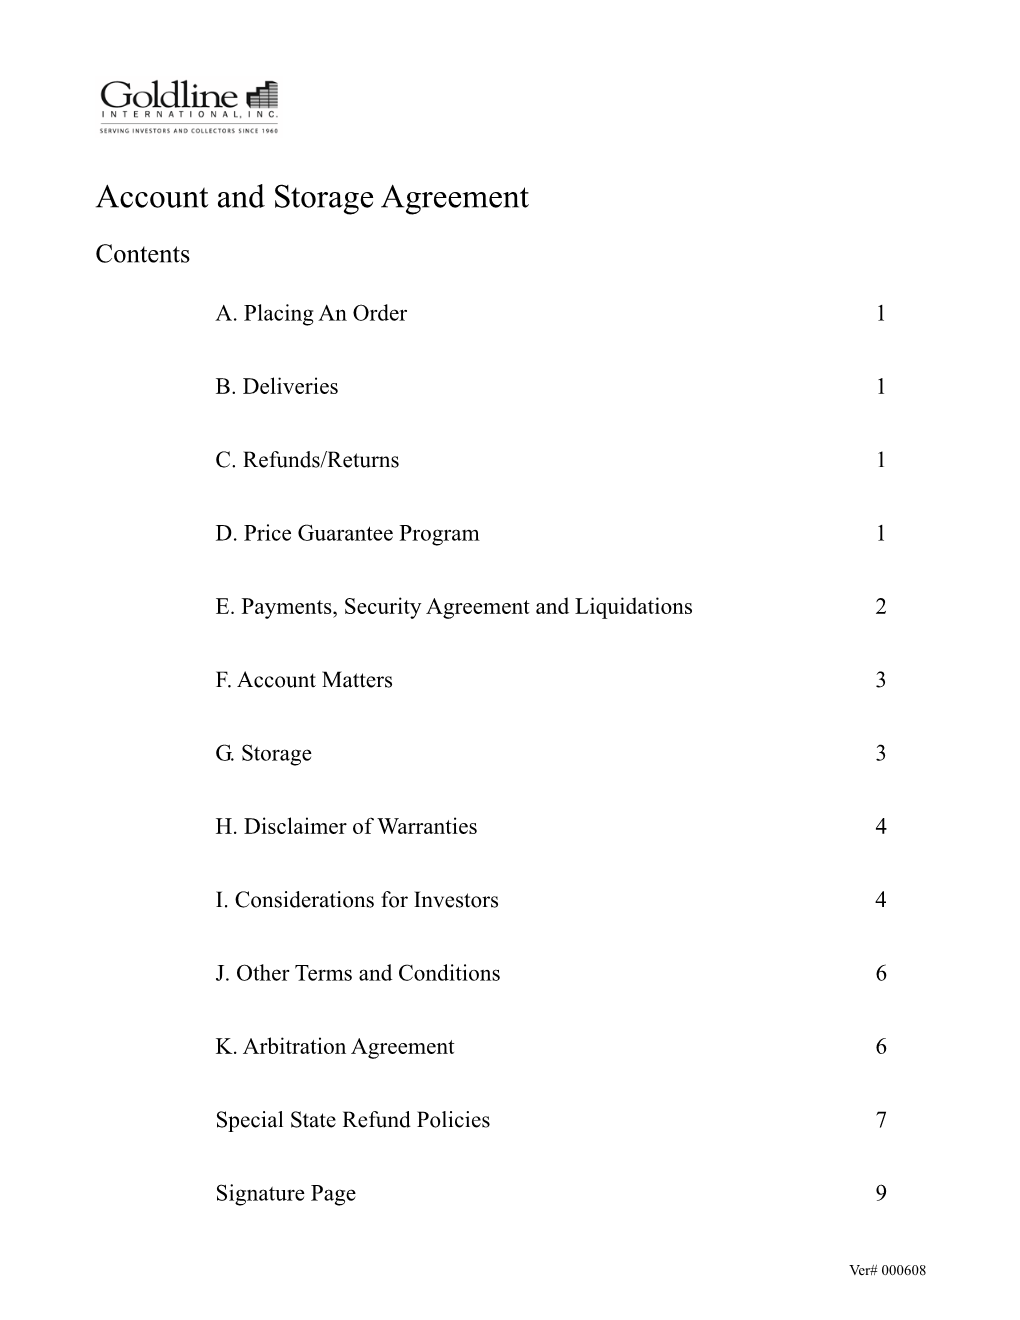 Account and Storage Agreement